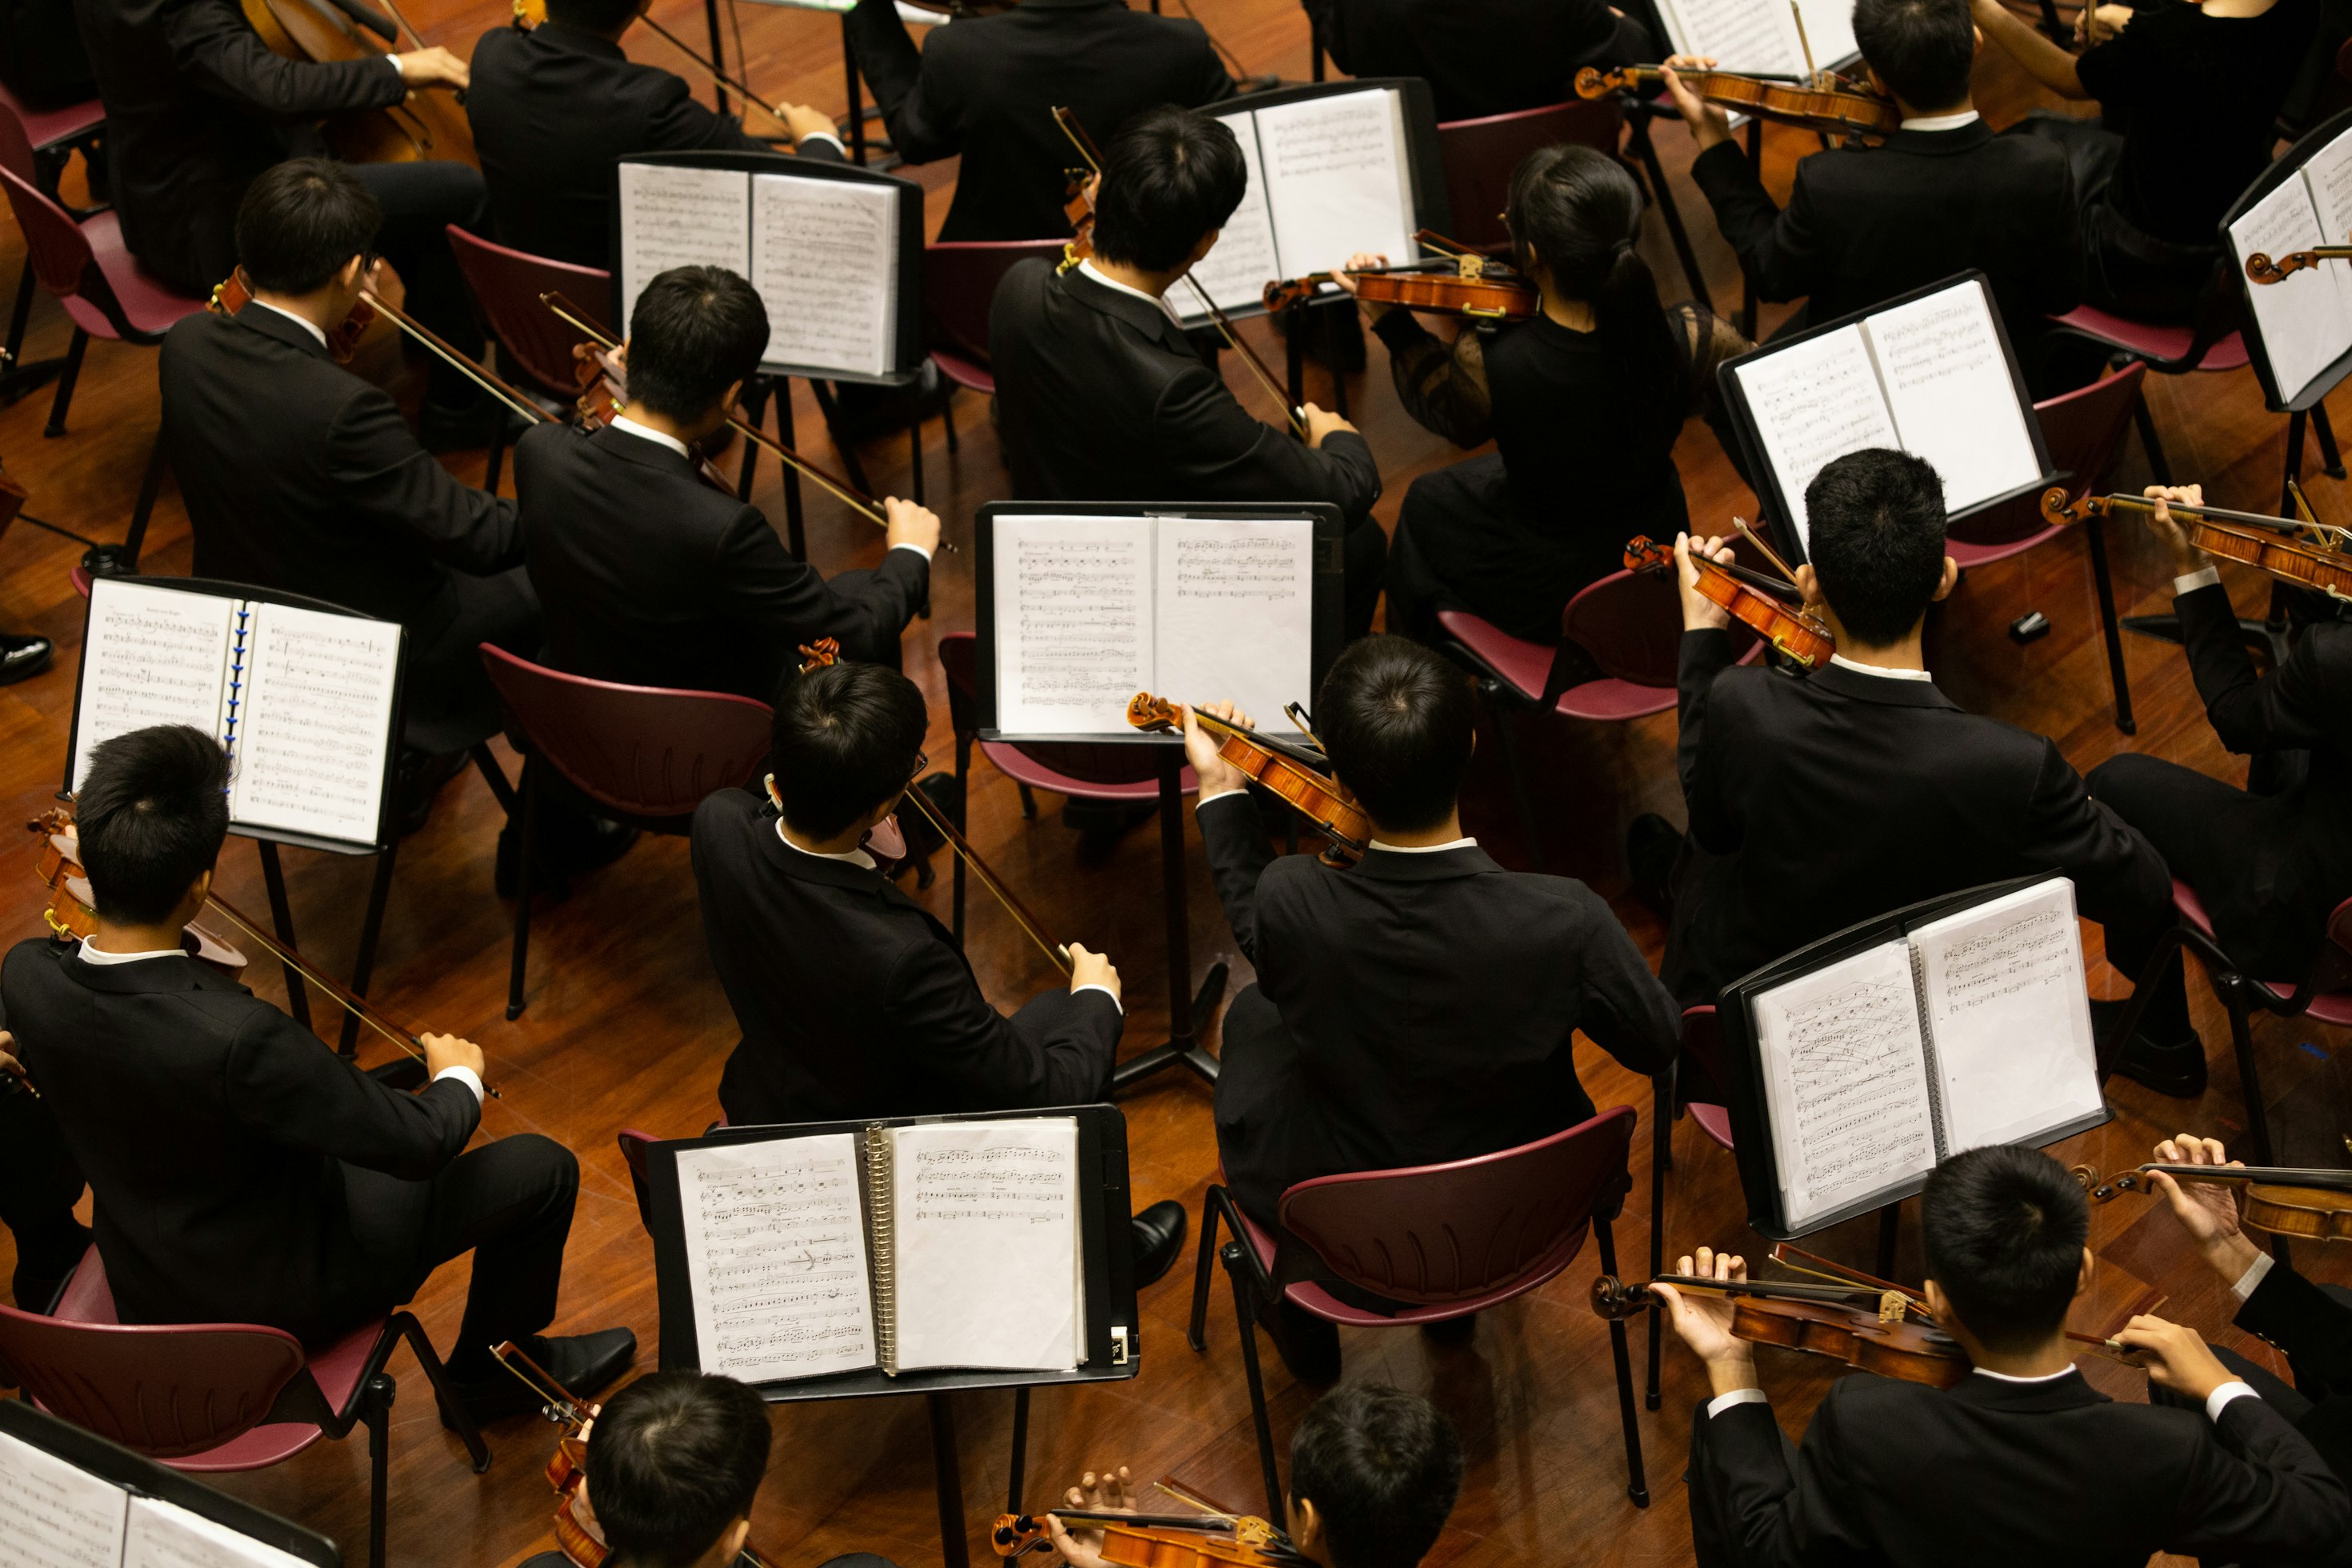 An orchestra on stage